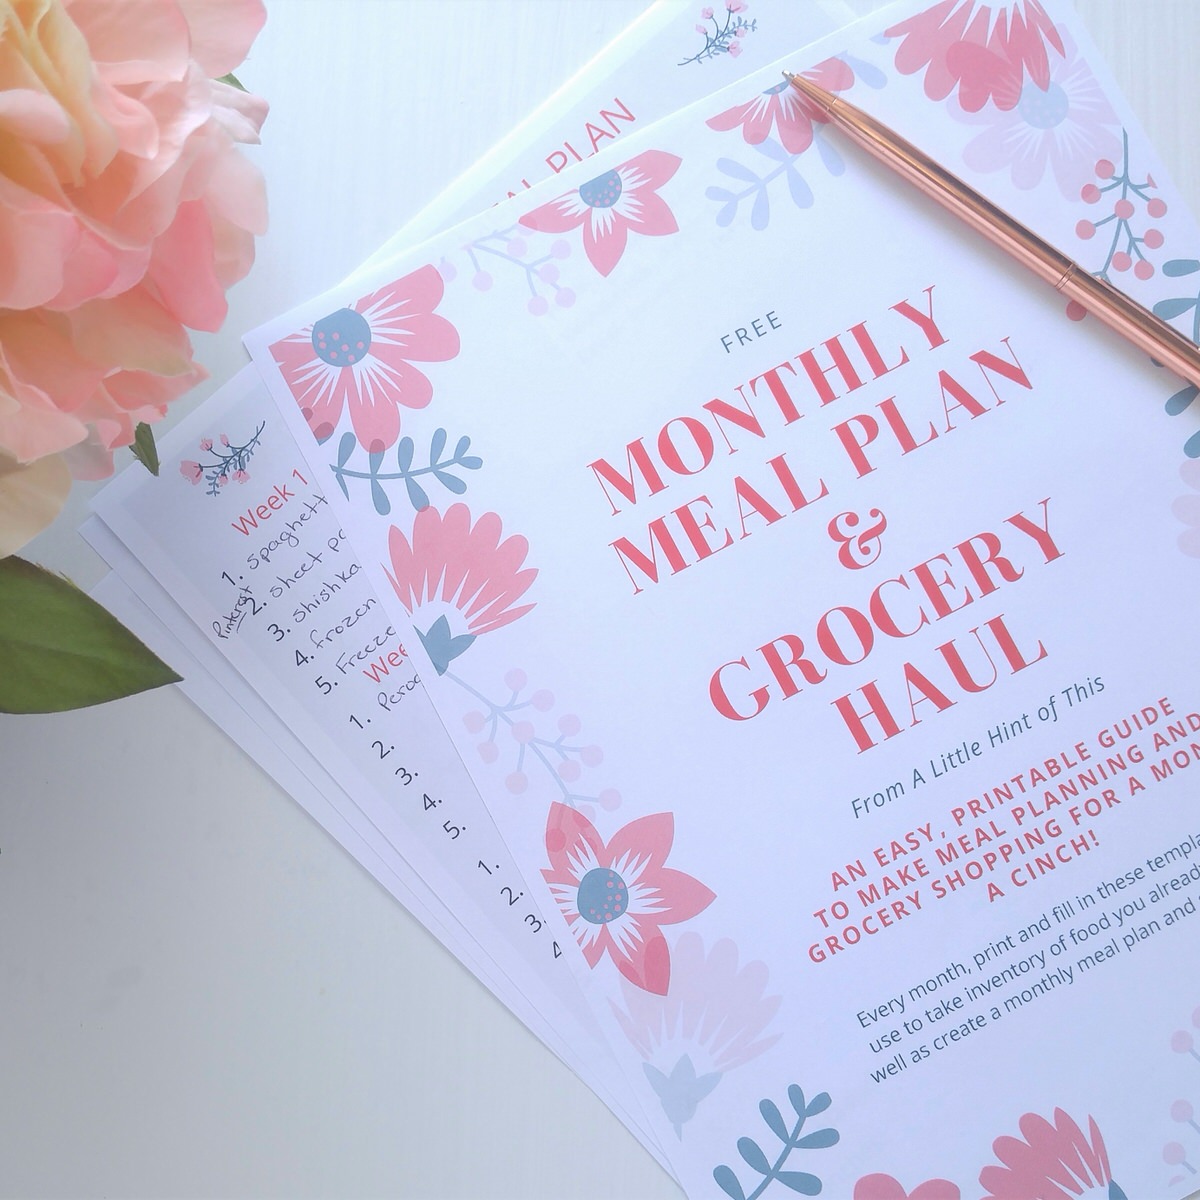 close up shot of meal planning printables on a white table beside a pink hydrangea